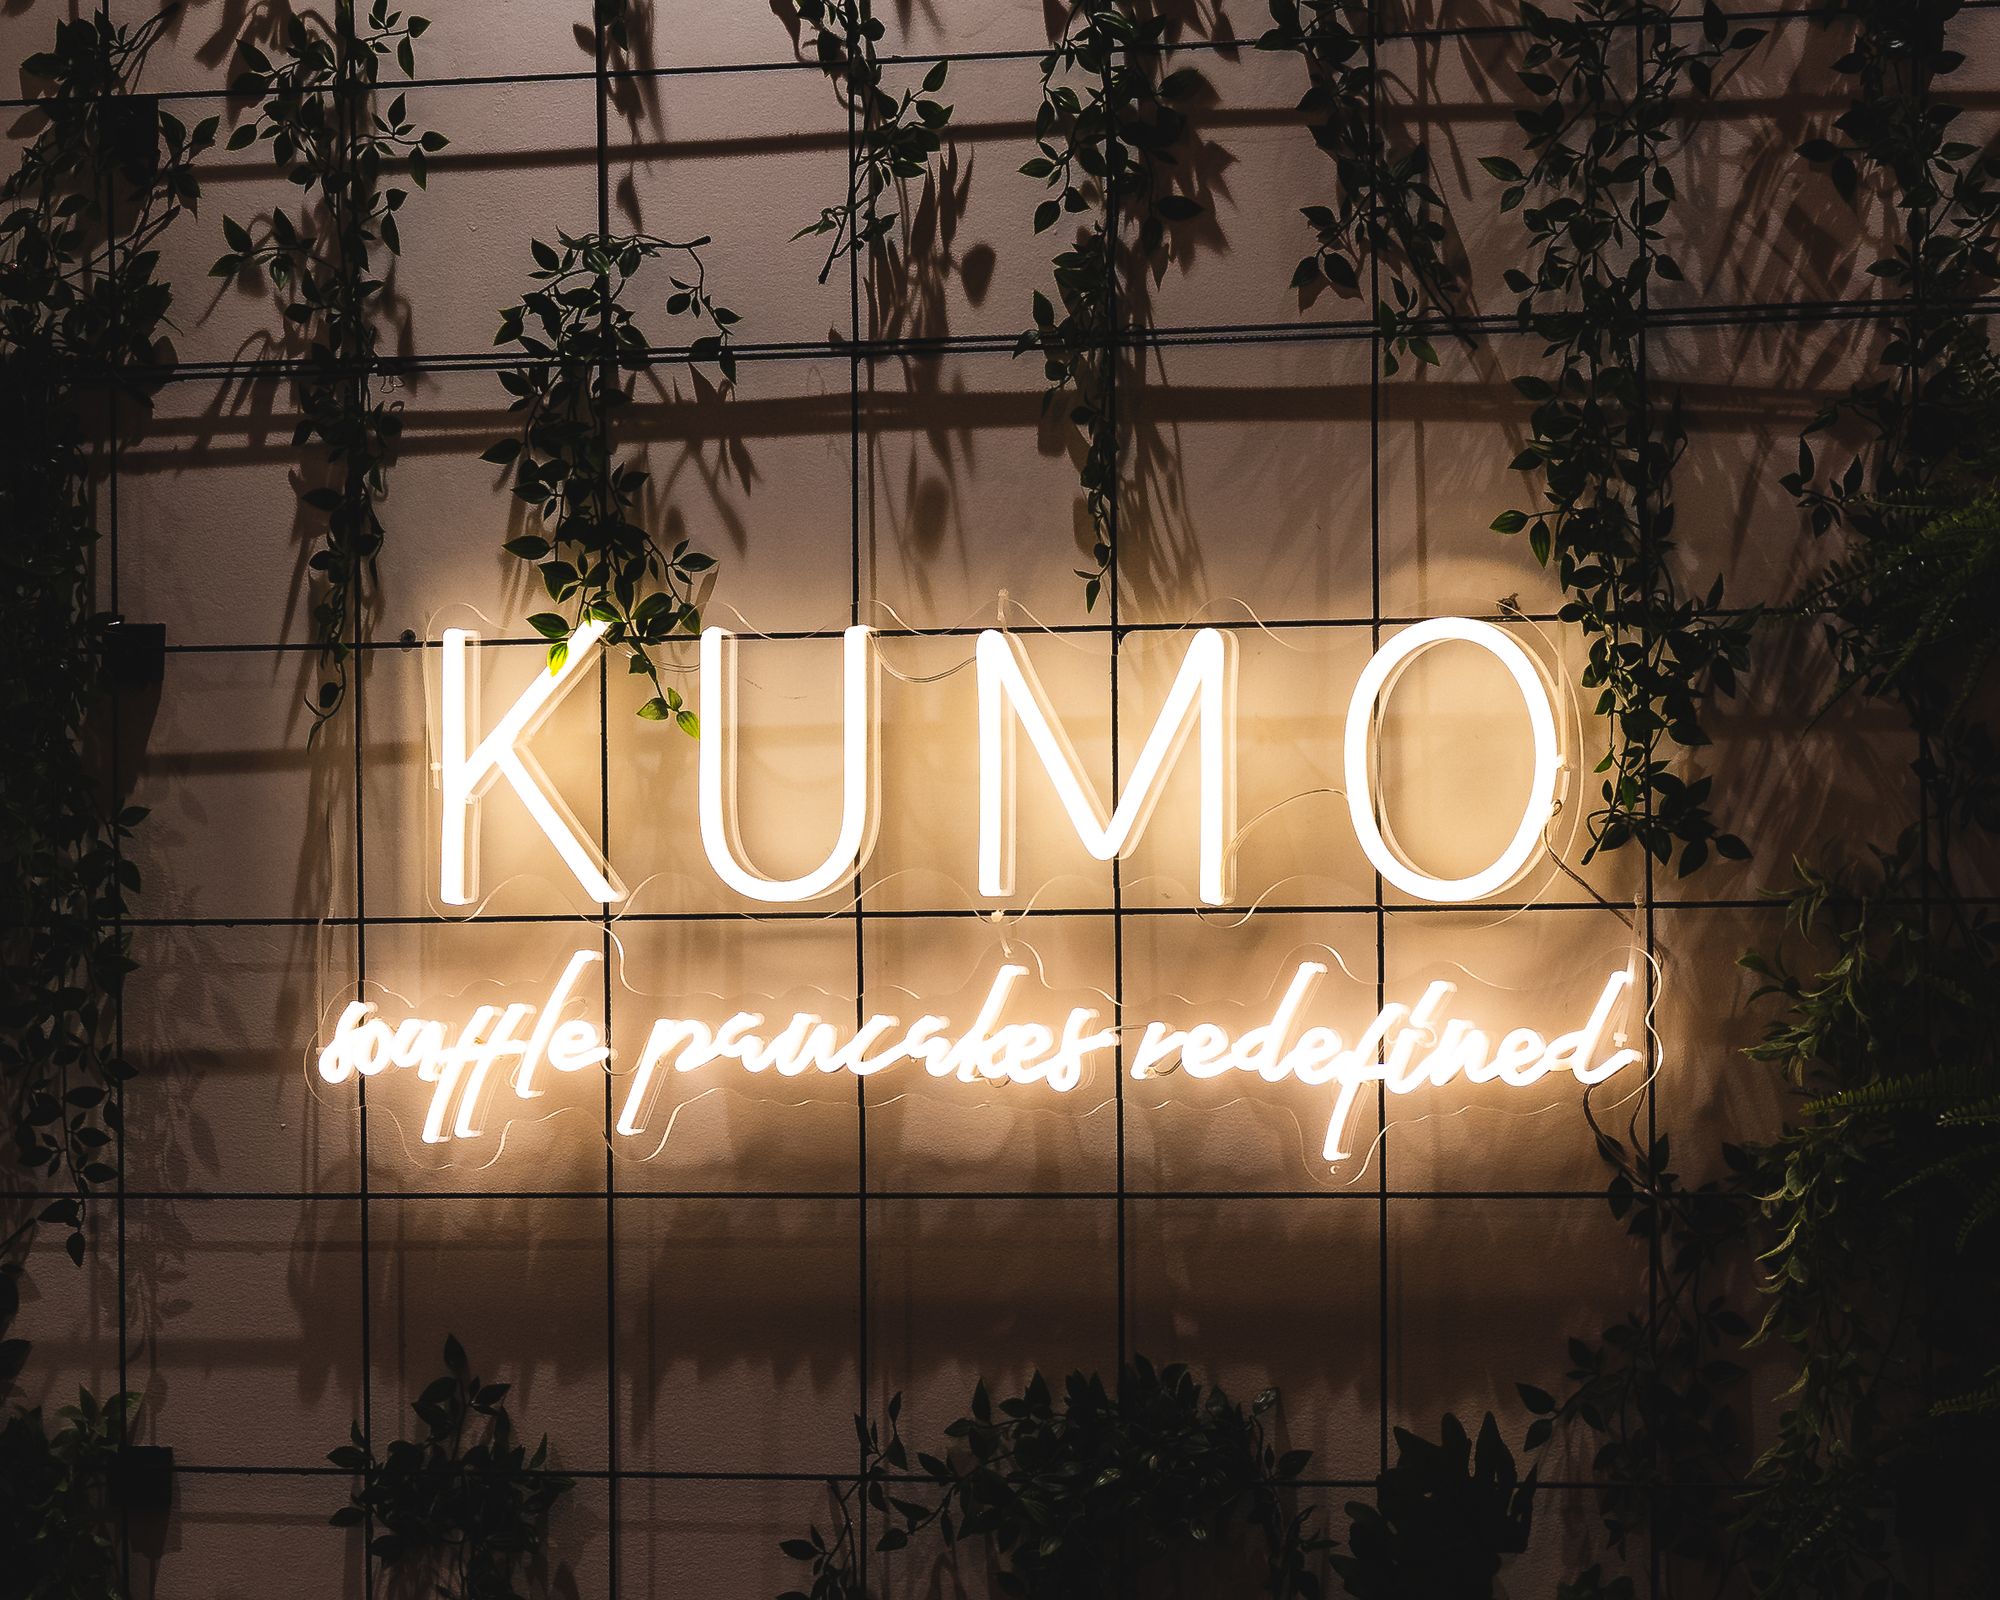 Kumo neon sign saying "souffle pancakes redefined"